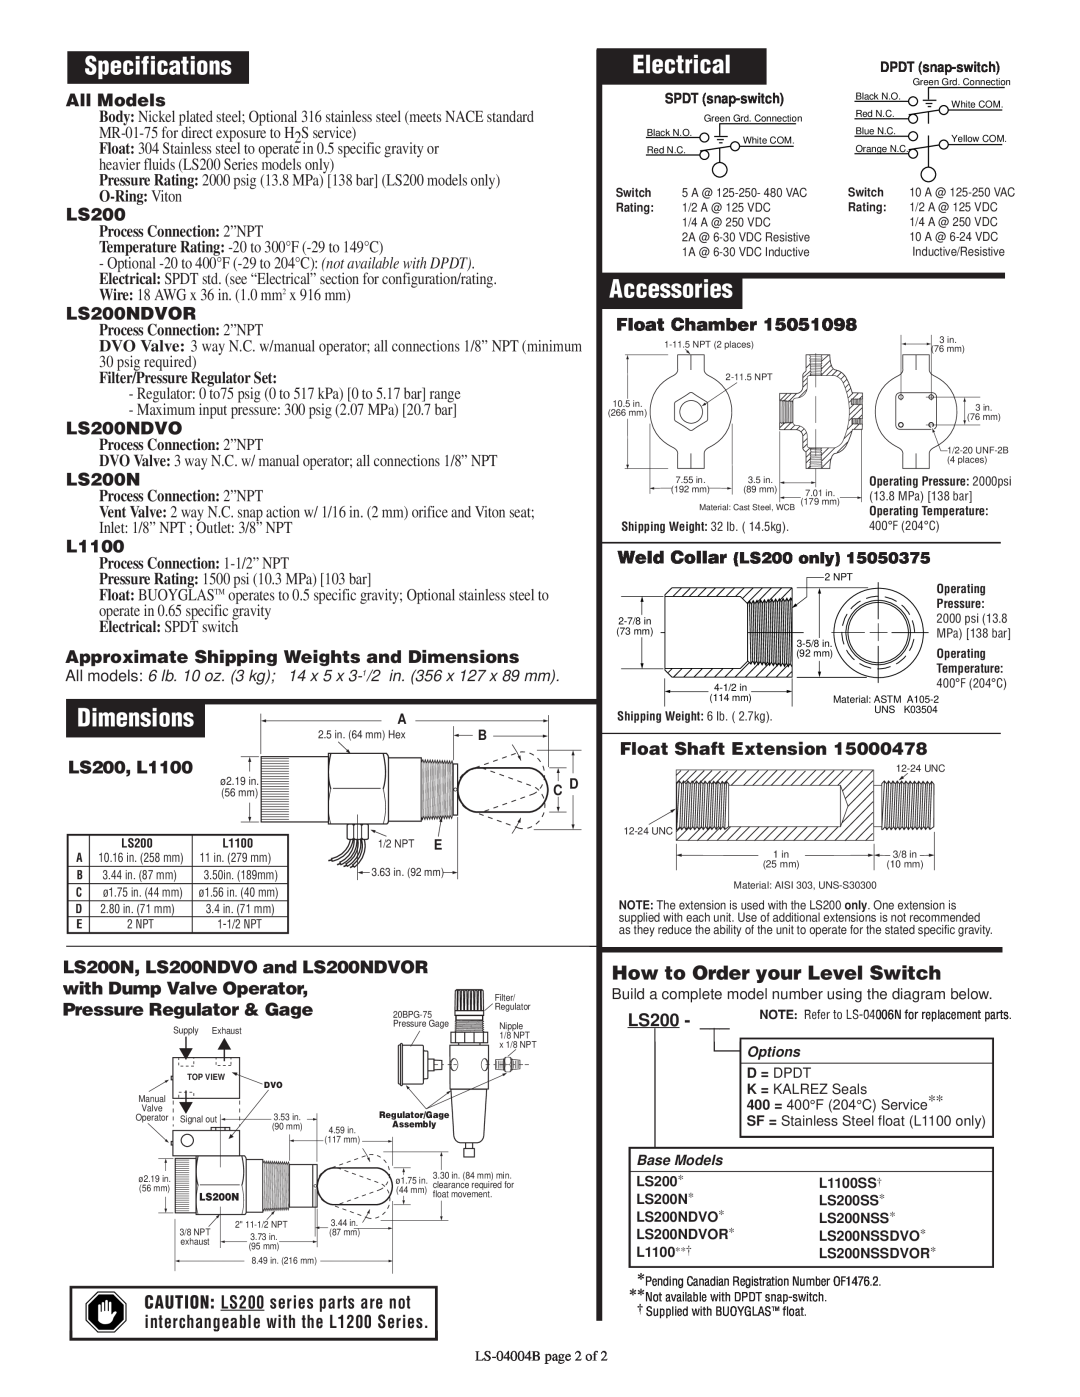 Murphy LS200 Series How to Order your Level Switch, Specifications, Electrical, Accessories, Dimensions, O-Ring Viton 